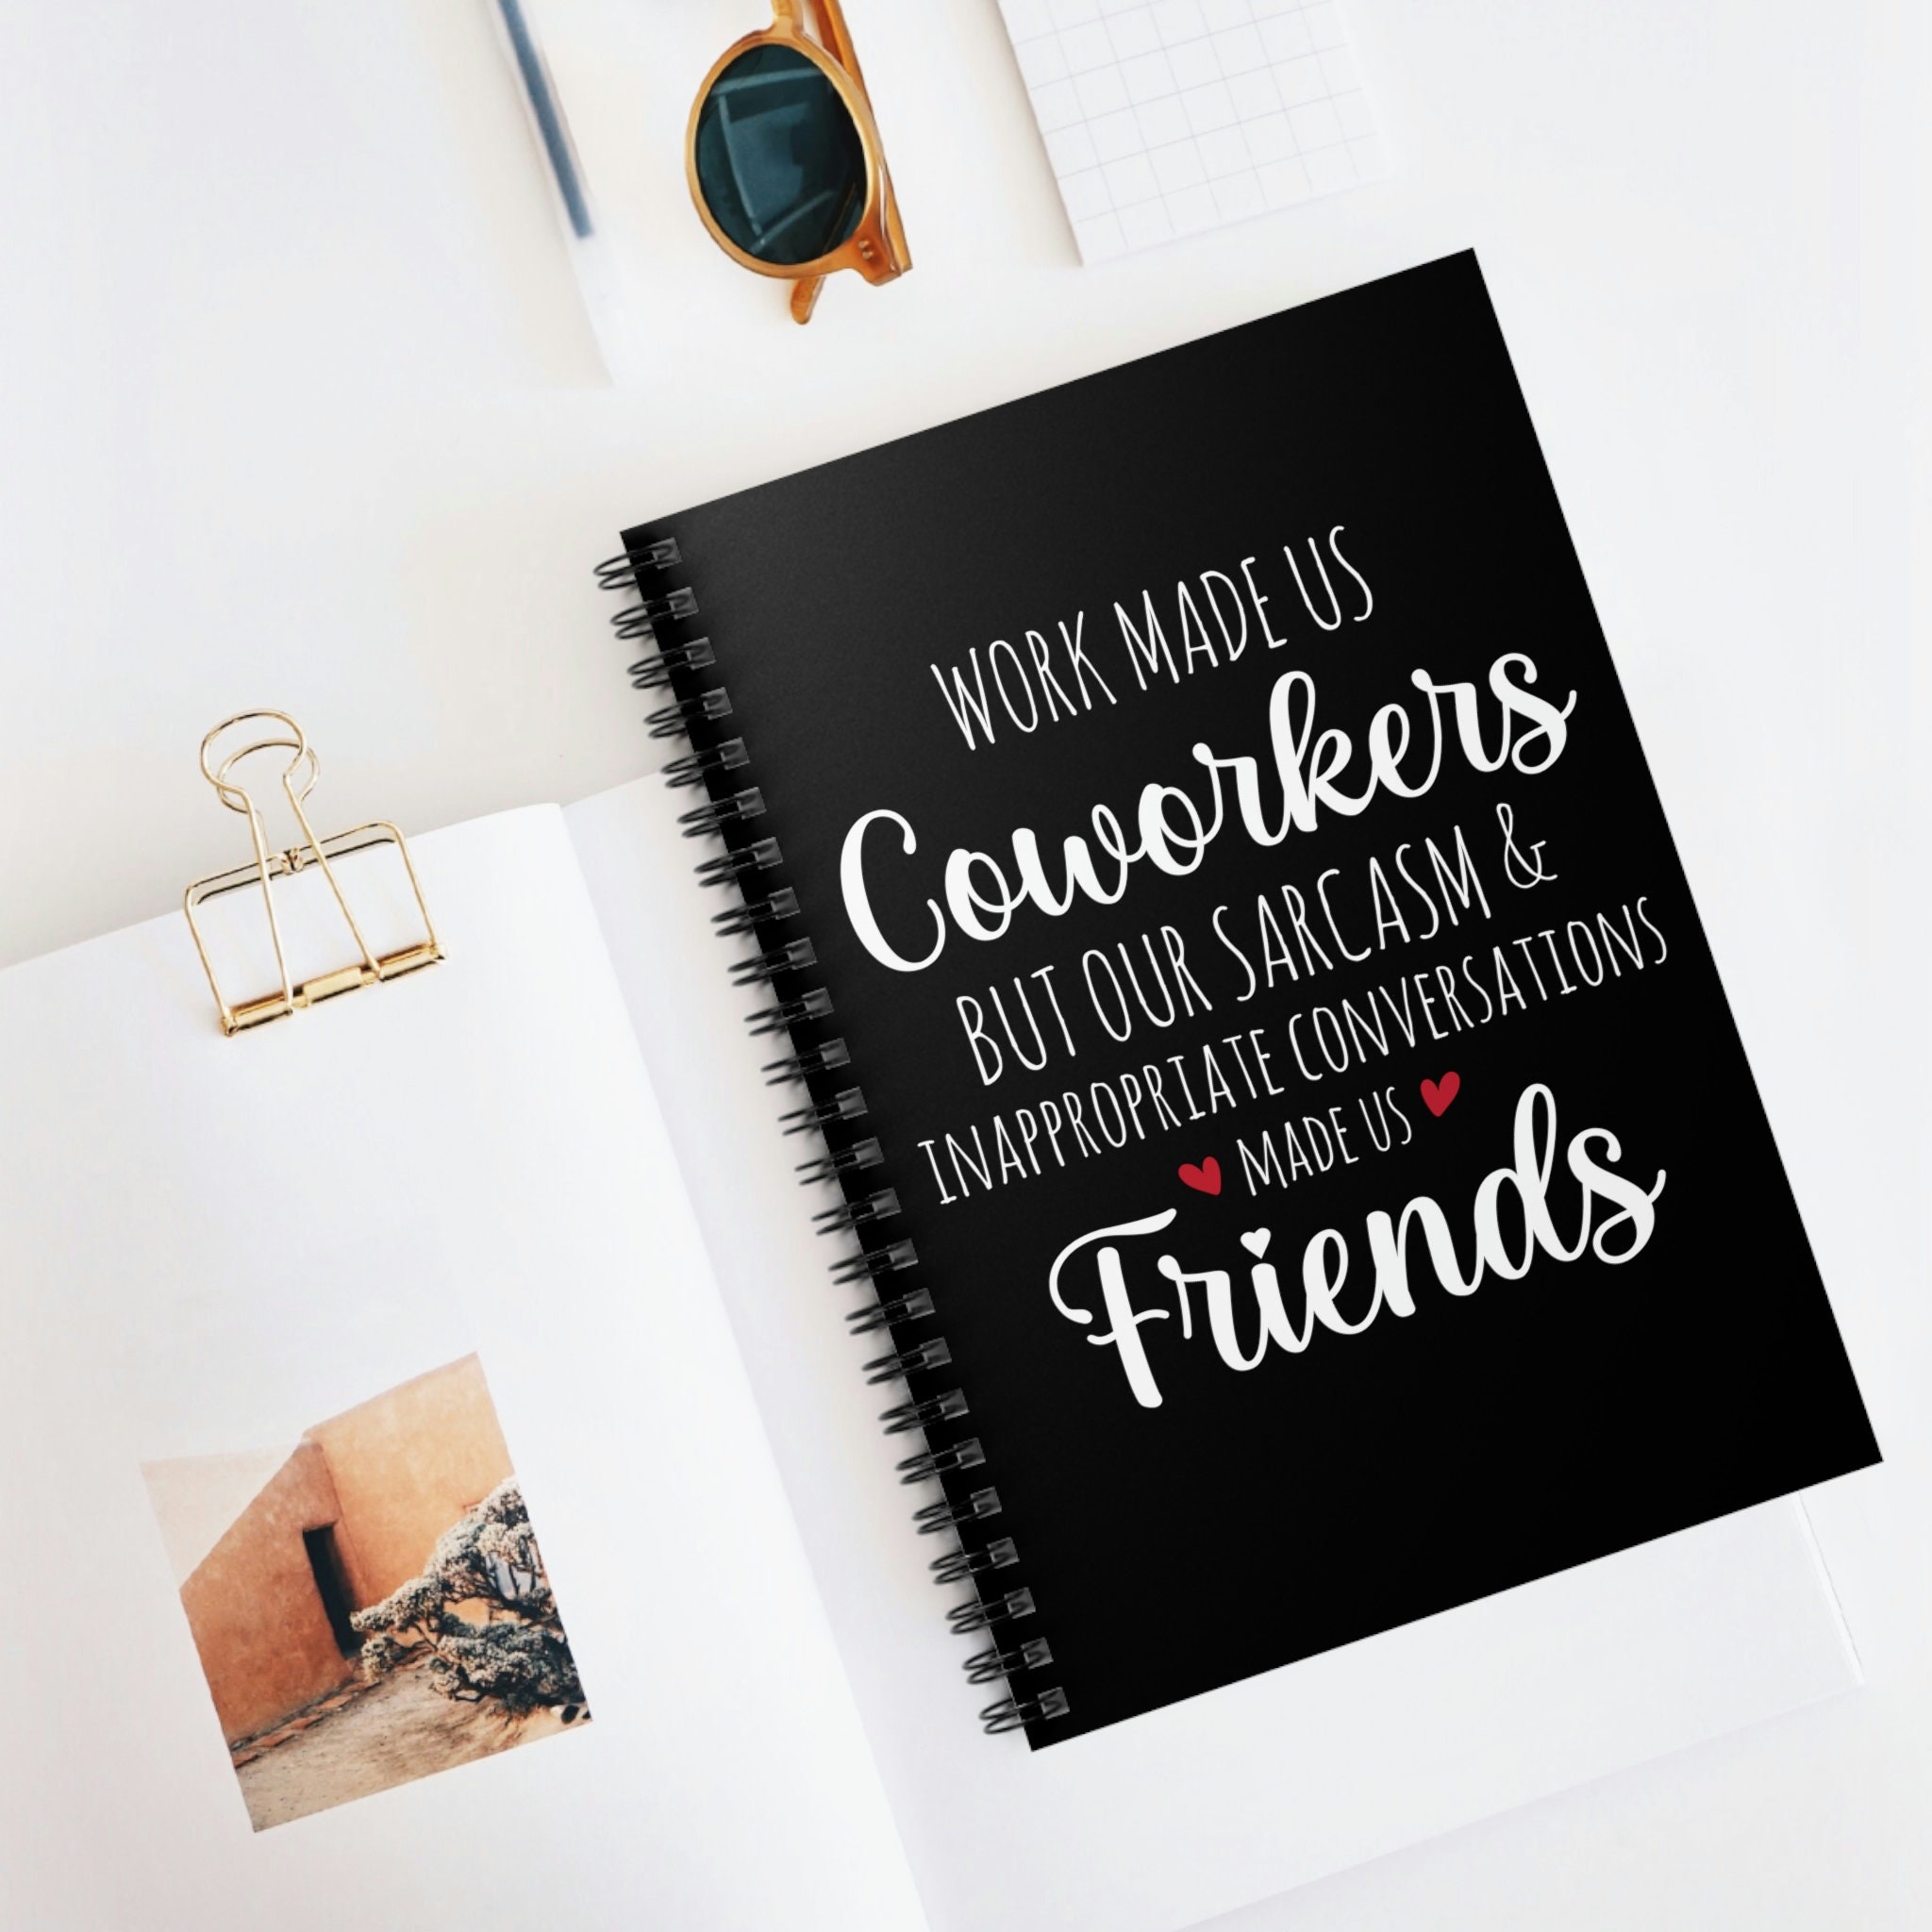 Online Friends Are Not The Same As Real Friends: Coworker Gag Perfect for  Gift Office School Funny Quotes Notebook Composition Wide Ruled (120 Pages)  6x9: Bow, Golden: 9798578352461: Books 